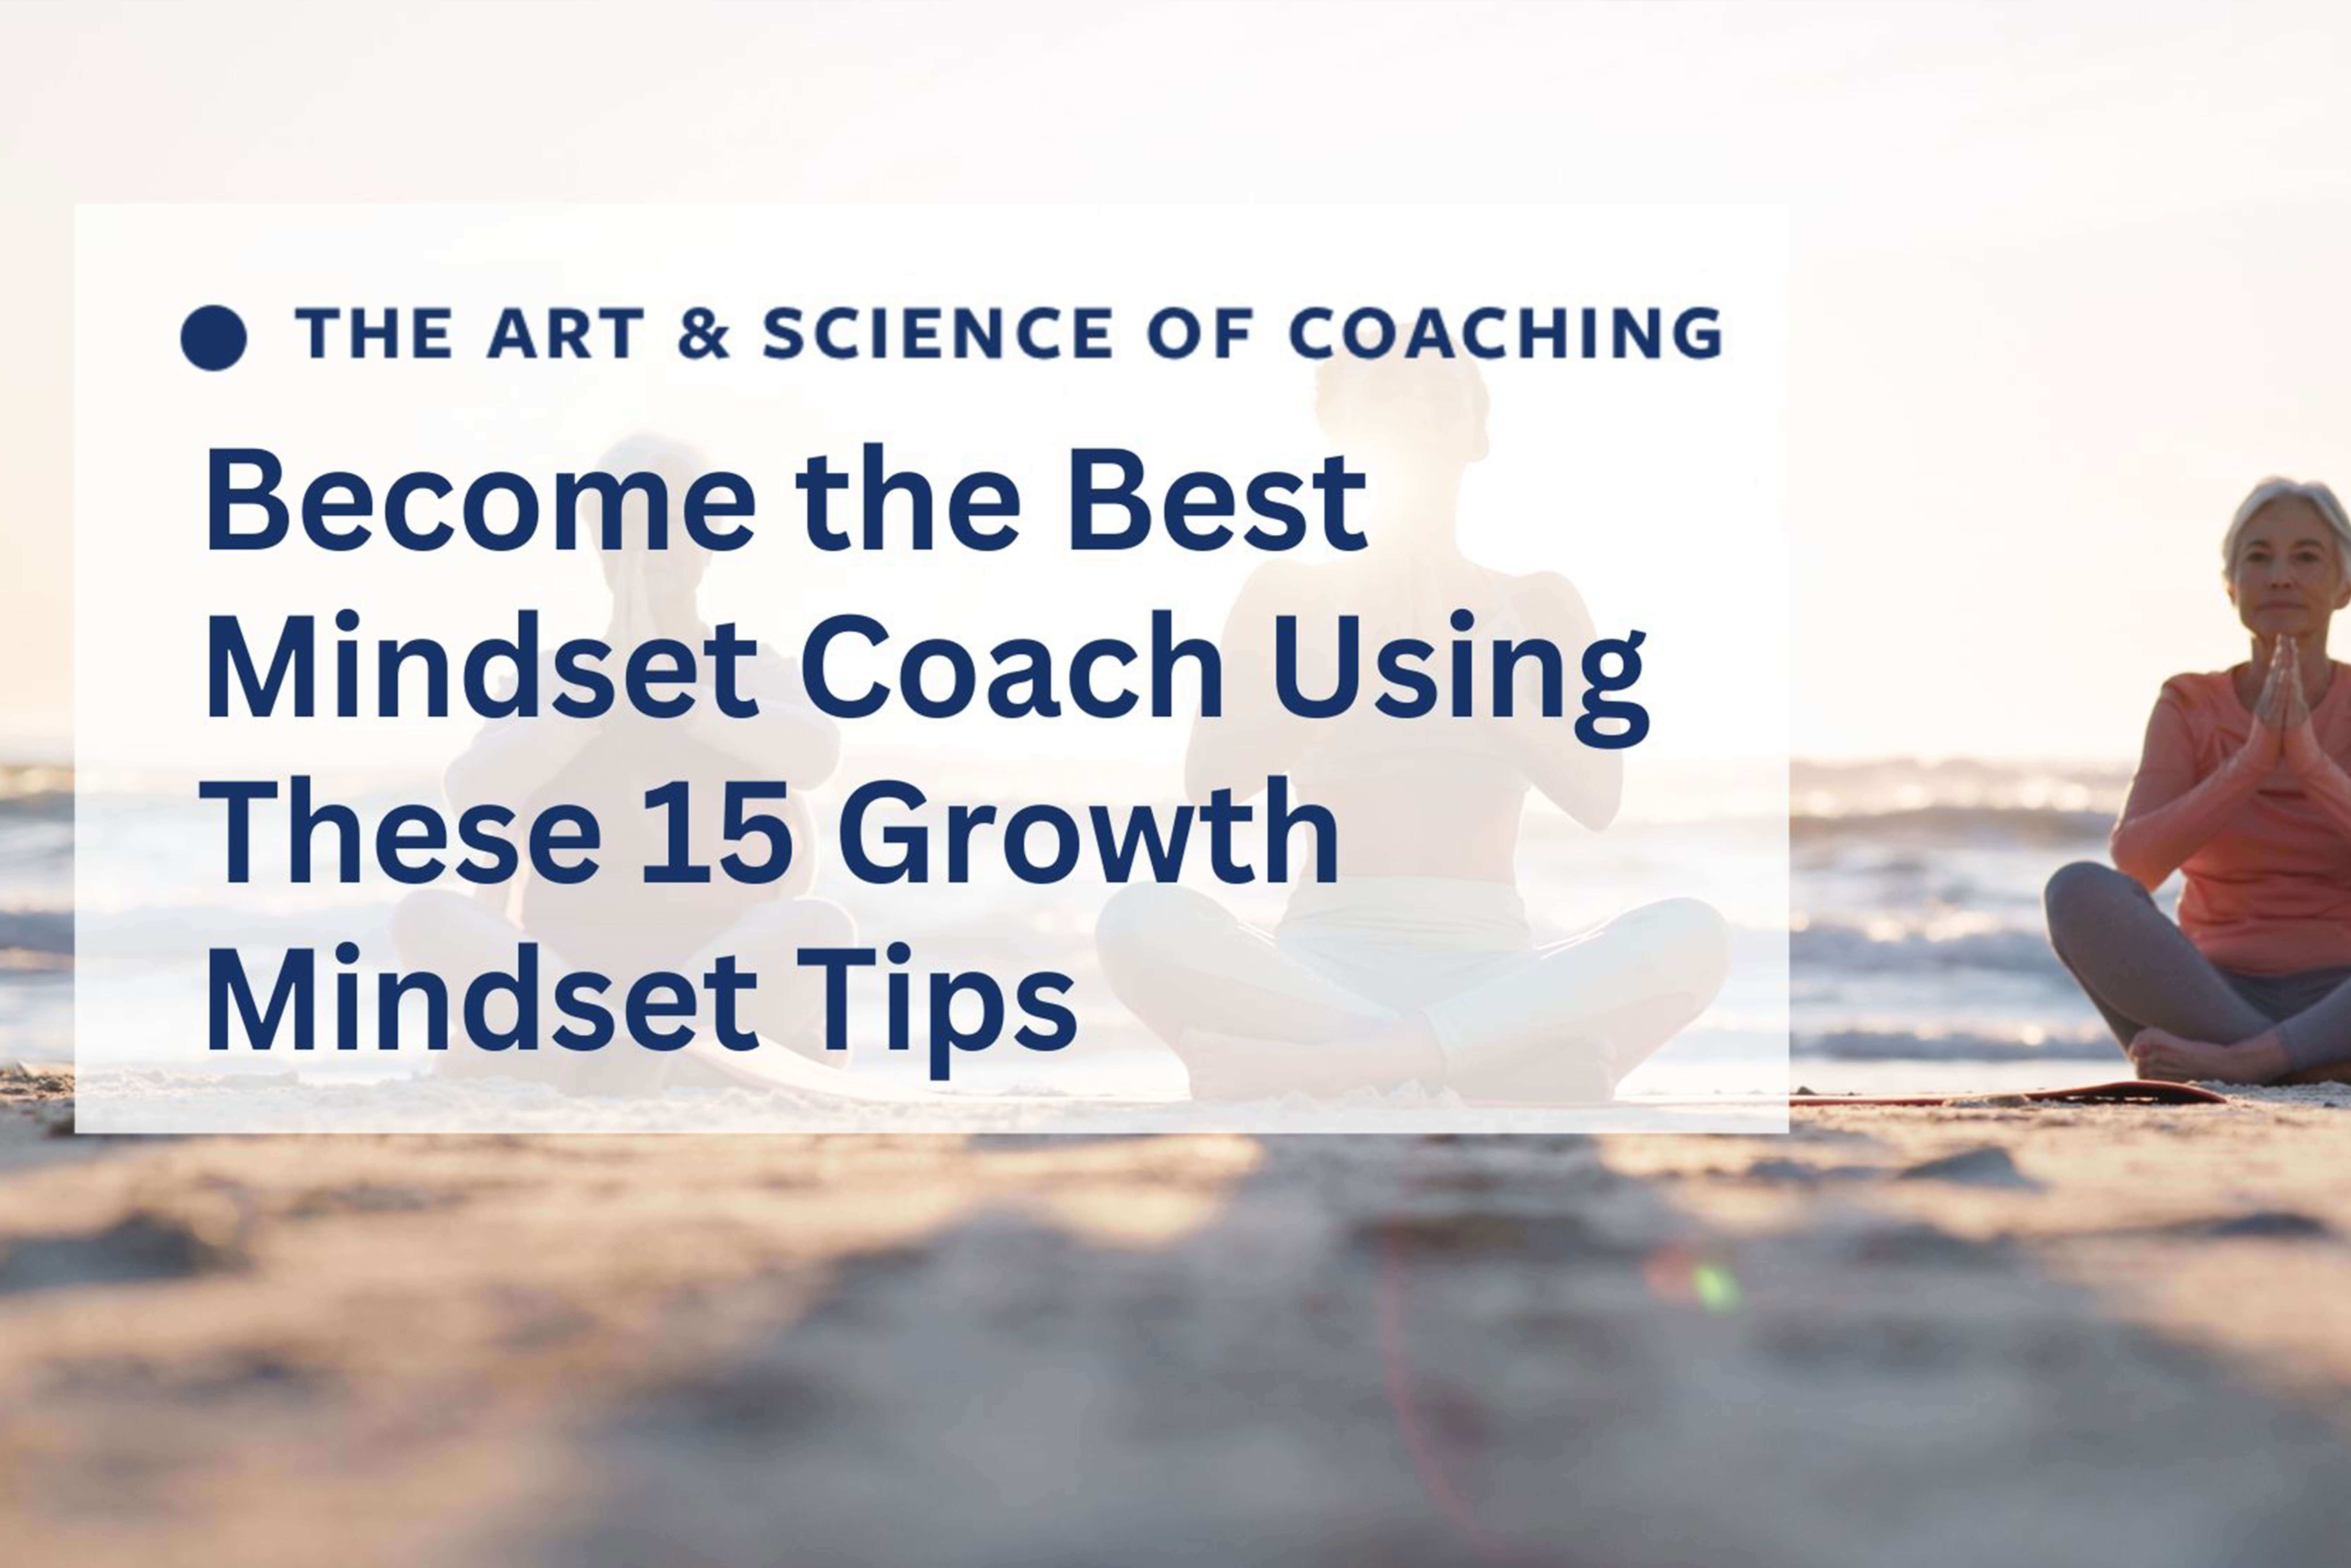 Become the best mindset coach with these 15 growth mindset tips.